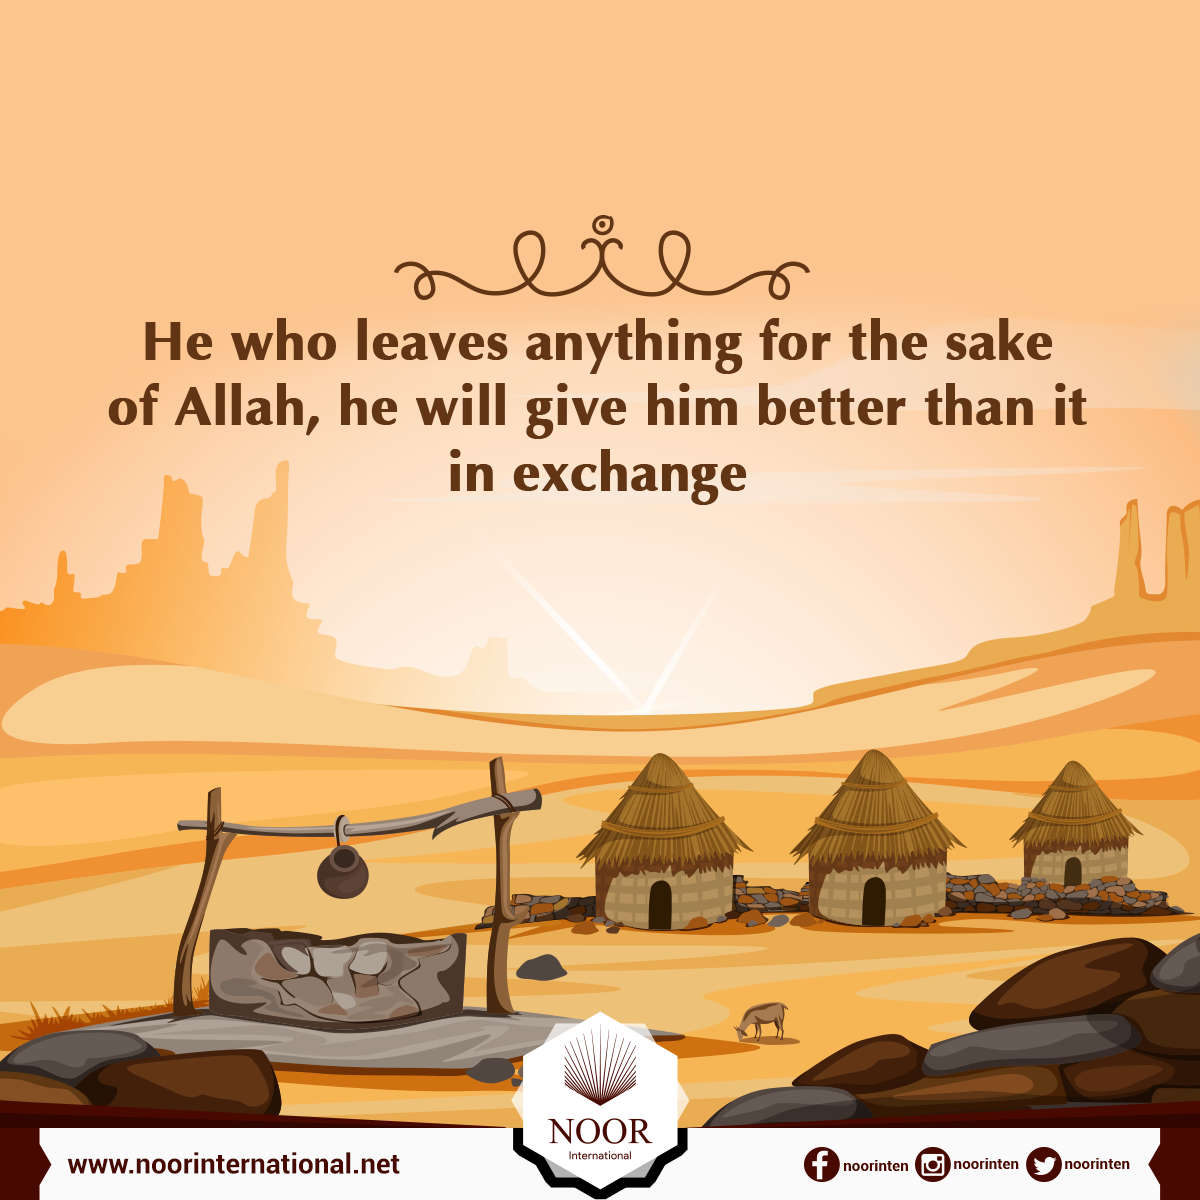 He who leaves anything for the sake of Allah, he will give him better than it in exchange